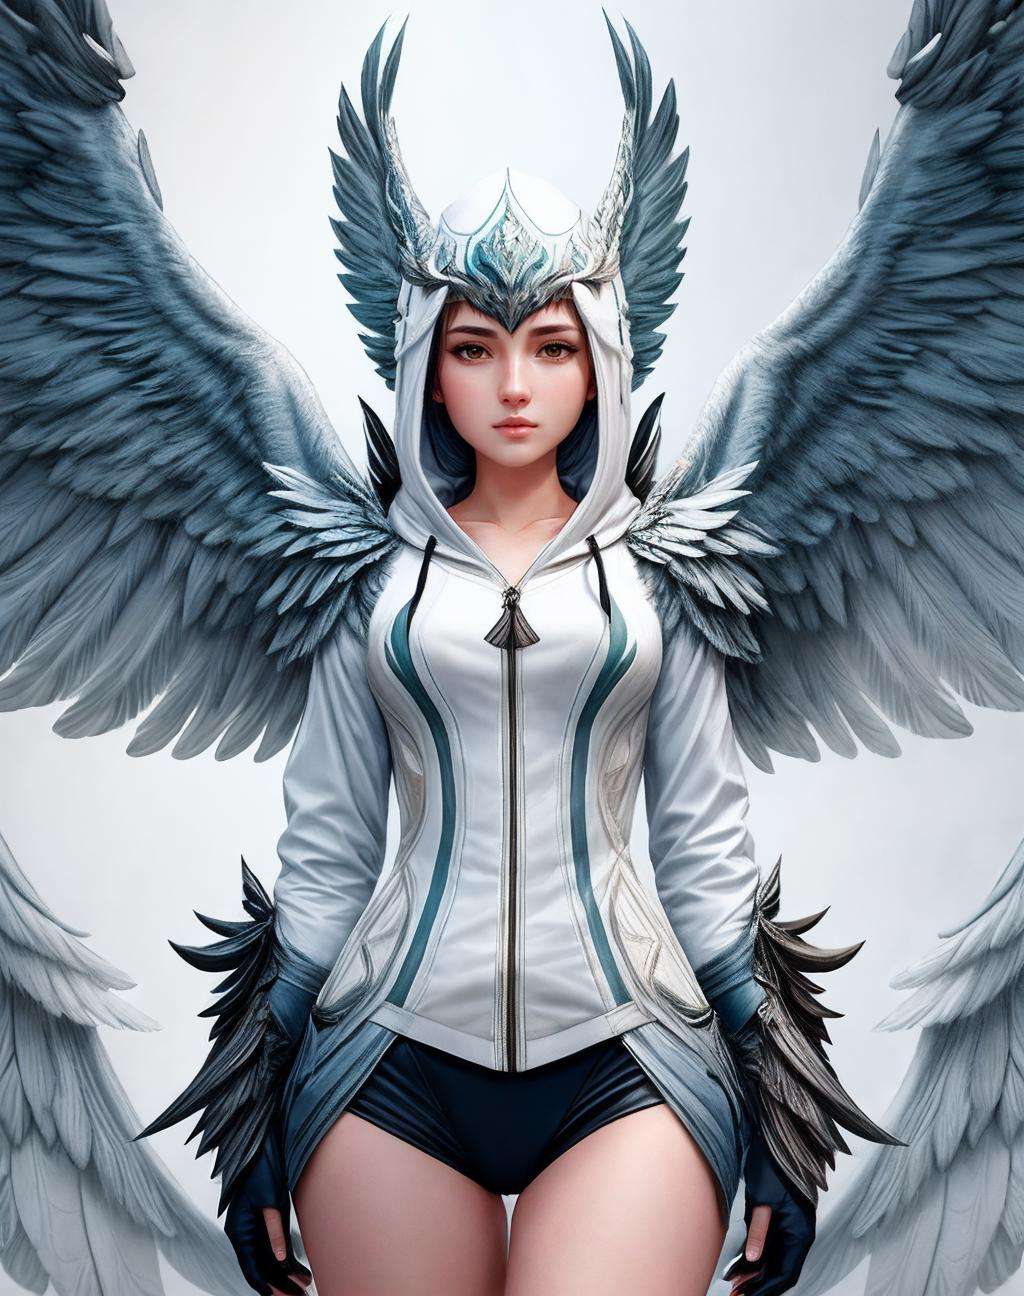 ((Masterpiece, best quality)),photography, detailed skin, realistic, photo-realistic, 8k, highly detailed, full length frame, High detail RAW color art, diffused soft lighting, shallow depth of field, sharp focus, hyperrealism, cinematic lightingedgGaruda_hoodie, a white and blue bird_woman with wings wearing an (oversize hoodie) ,wearing edgGaruda_hoodie <lora:edgGarudaHoodies:1>